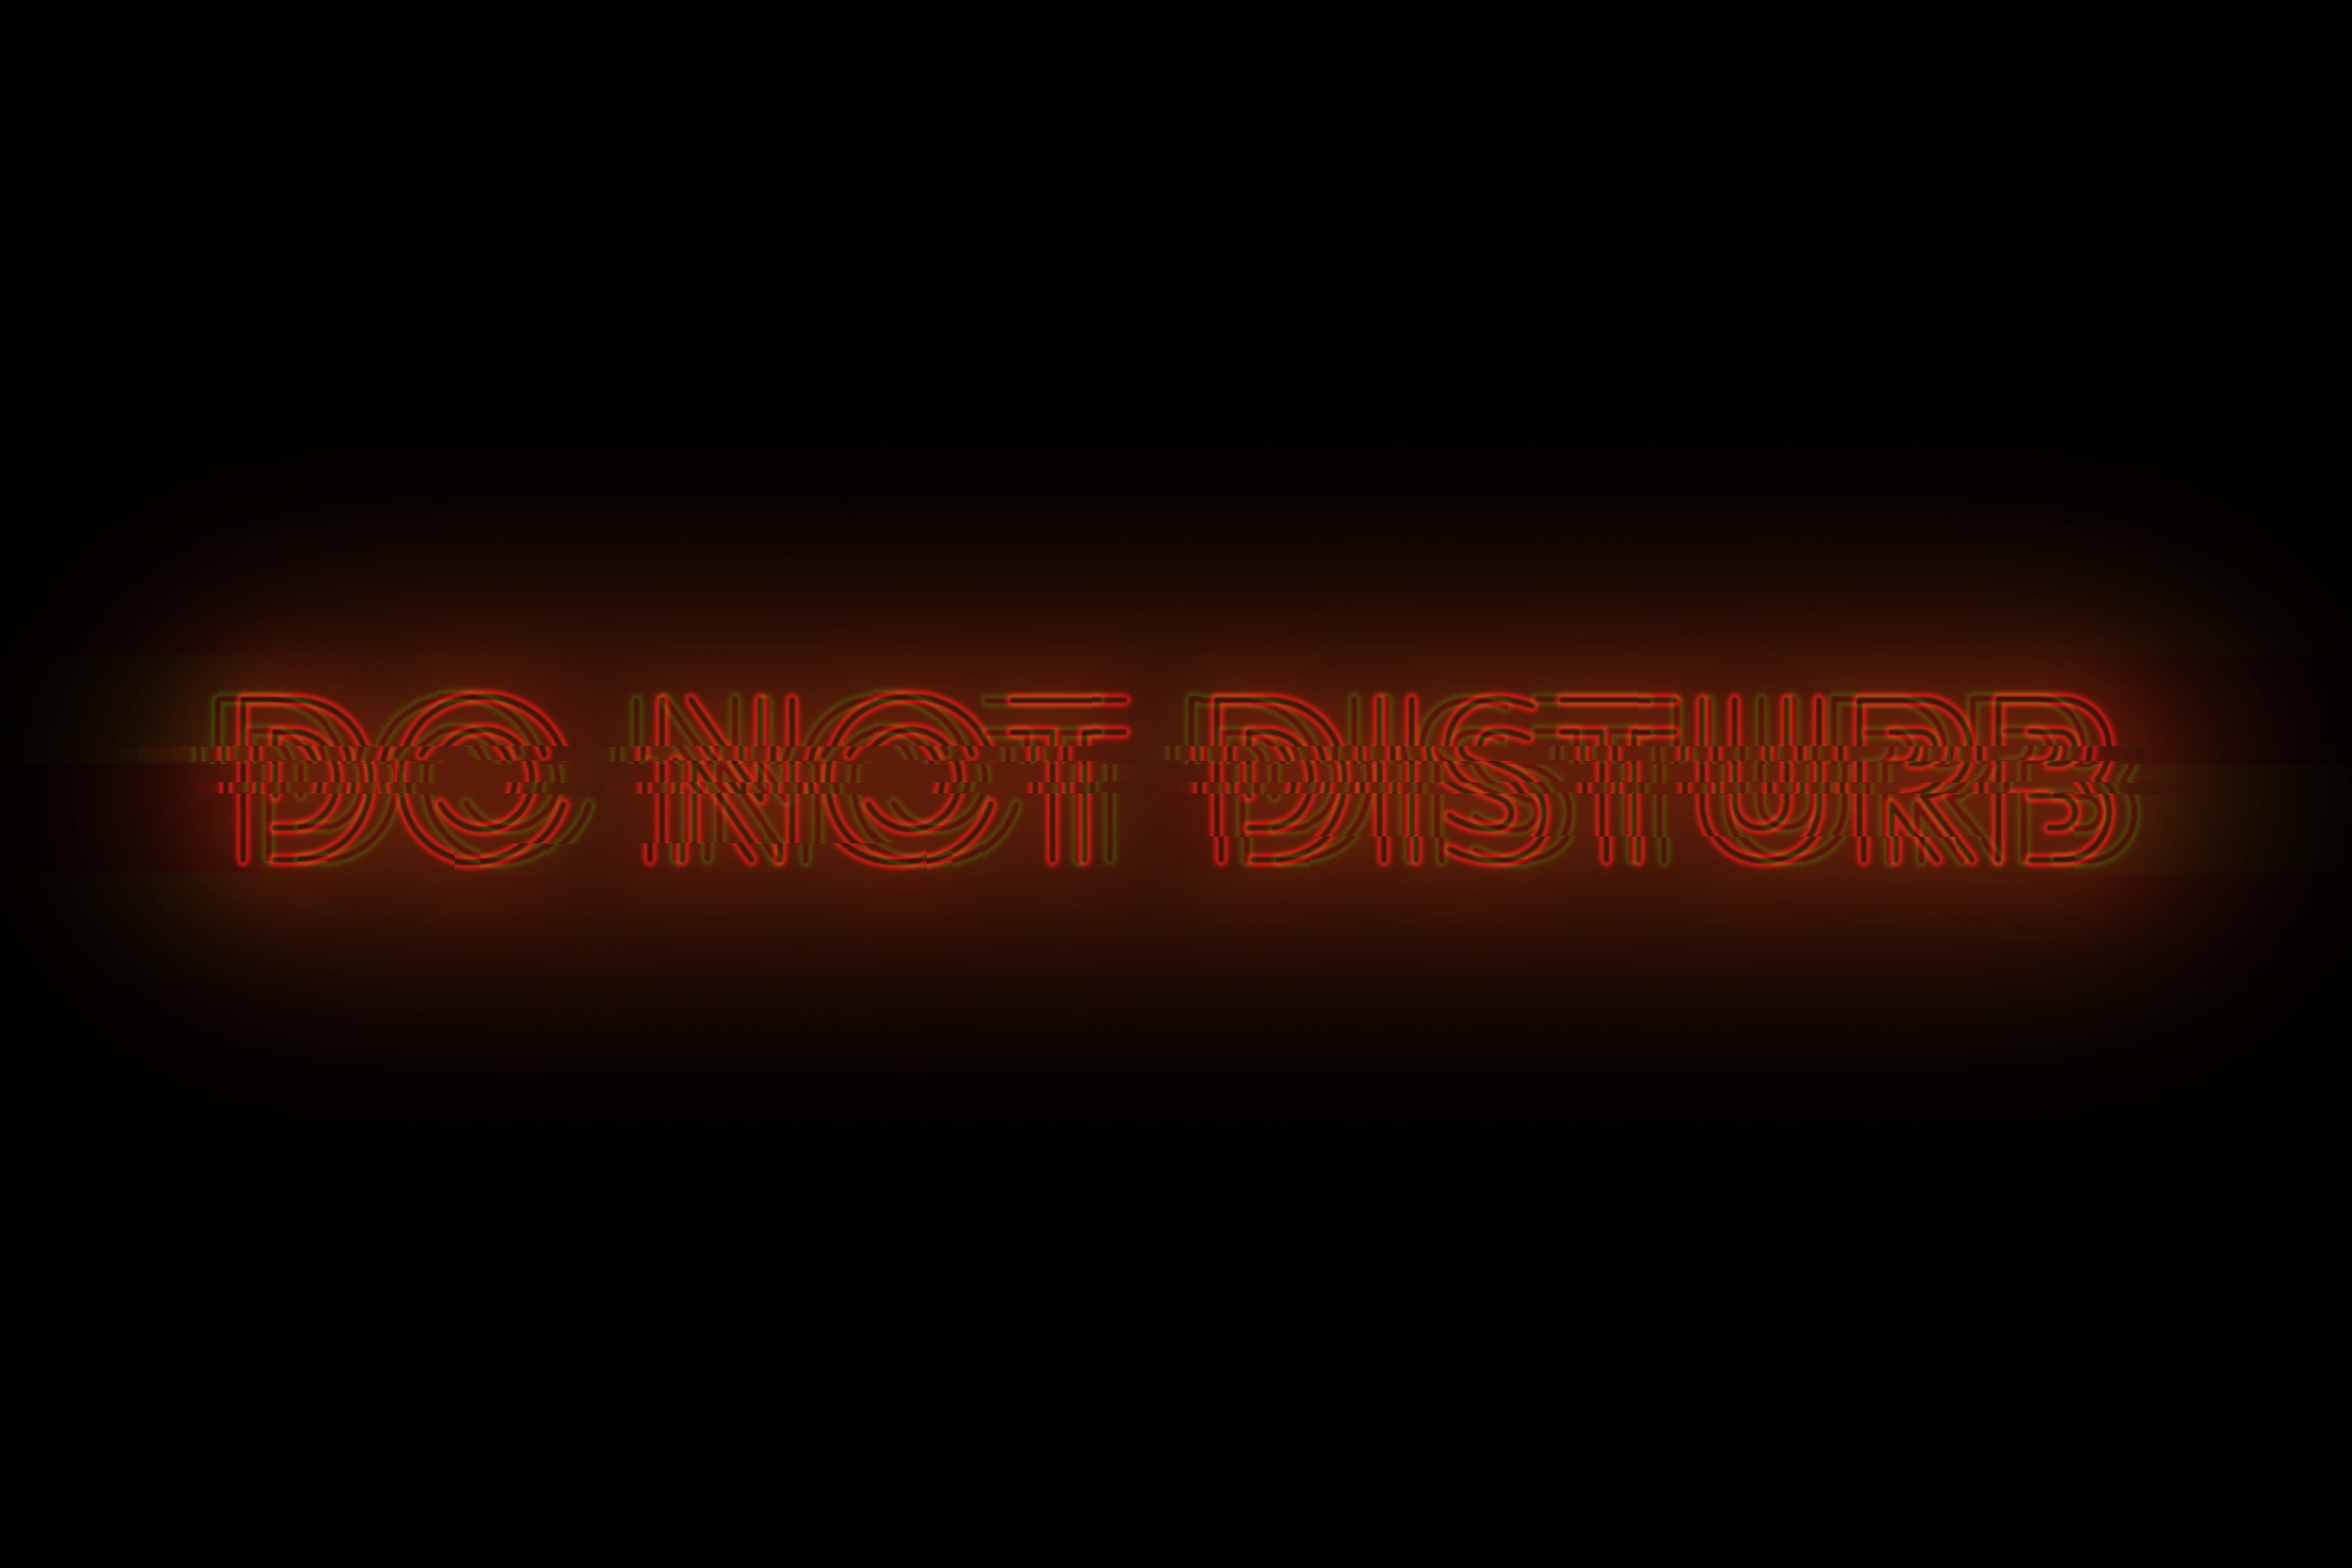 Do Not Disturb The Wallpaper Of Personalized Text Cell Phone Images Free  Download on Lovepik | 400473038